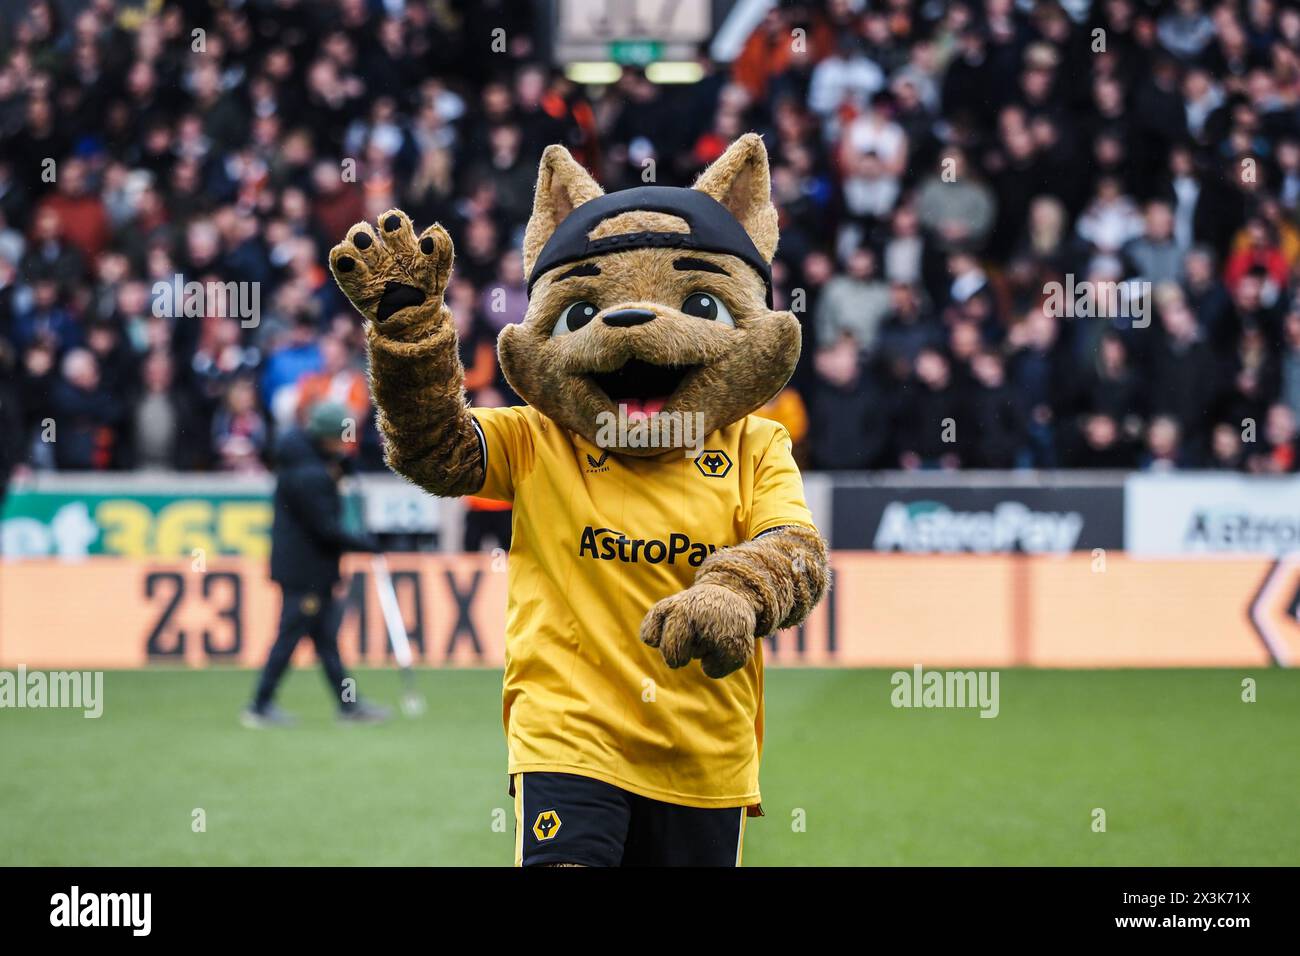 Wolverhampton, UK. 27th Apr, 2024. Wolverhampton, England, April 27th 2024: Team mascot during the Premier League football match between Wolverhampton Wanderers and Luton Town at Molineux stadium in Wolverhampton, England (Natalie Mincher/SPP) Credit: SPP Sport Press Photo. /Alamy Live News Stock Photo